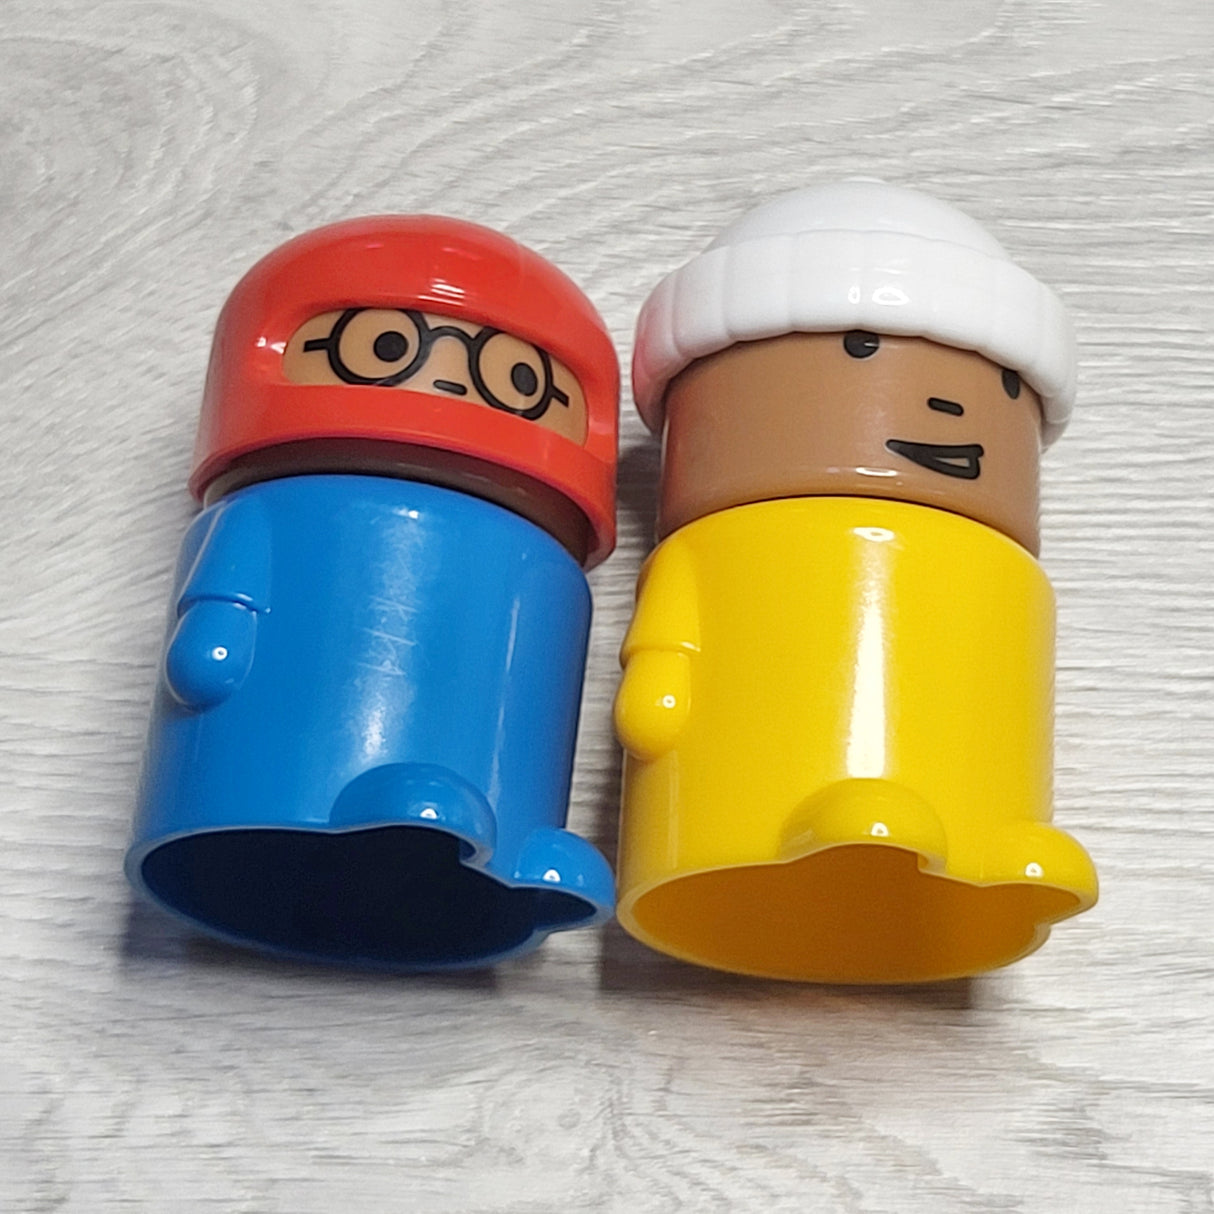 ALWS1 - IKEA people (set of 2), good condition - interchangeable parts